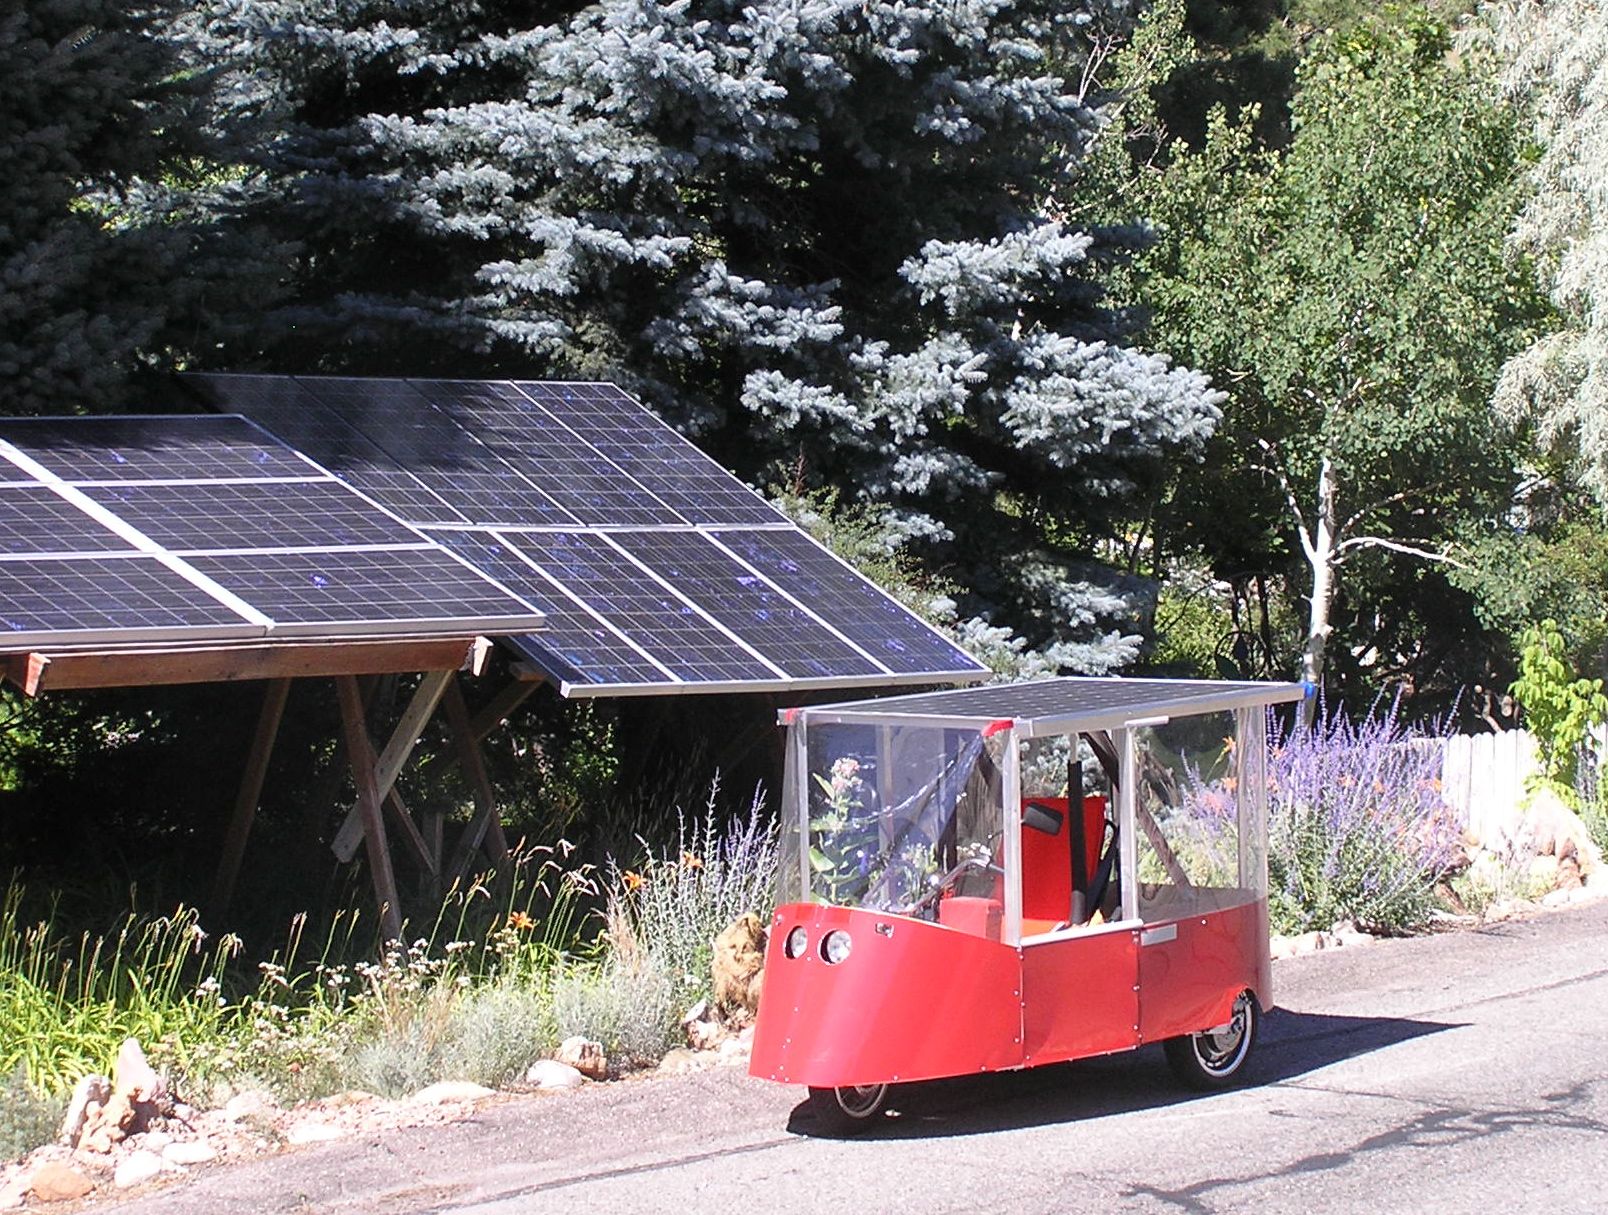 Solar Powered Electric Commuter Vehicle "Ecotrike" with Zero Emissions